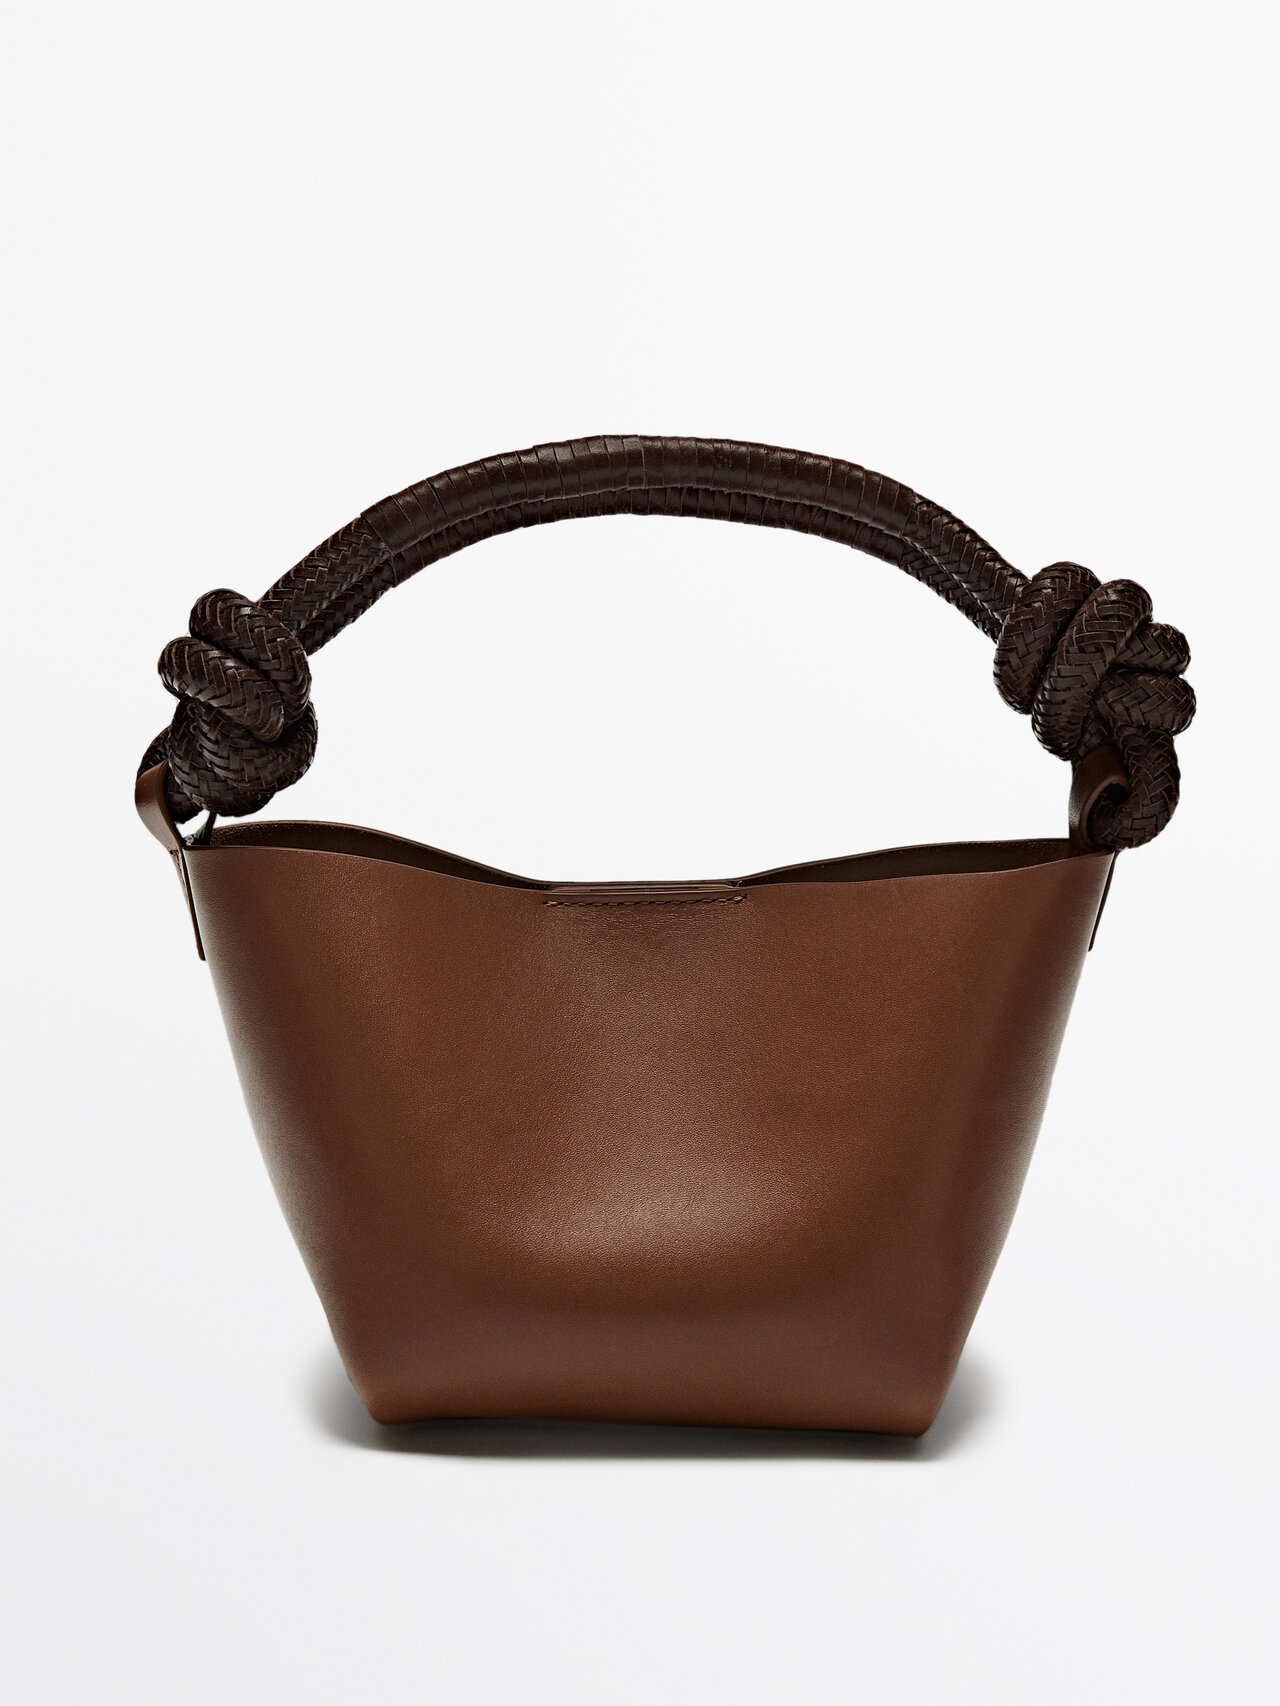 Massimo Dutti Mini Nappa Leather Crossbody Bag With Knot Details In Brown